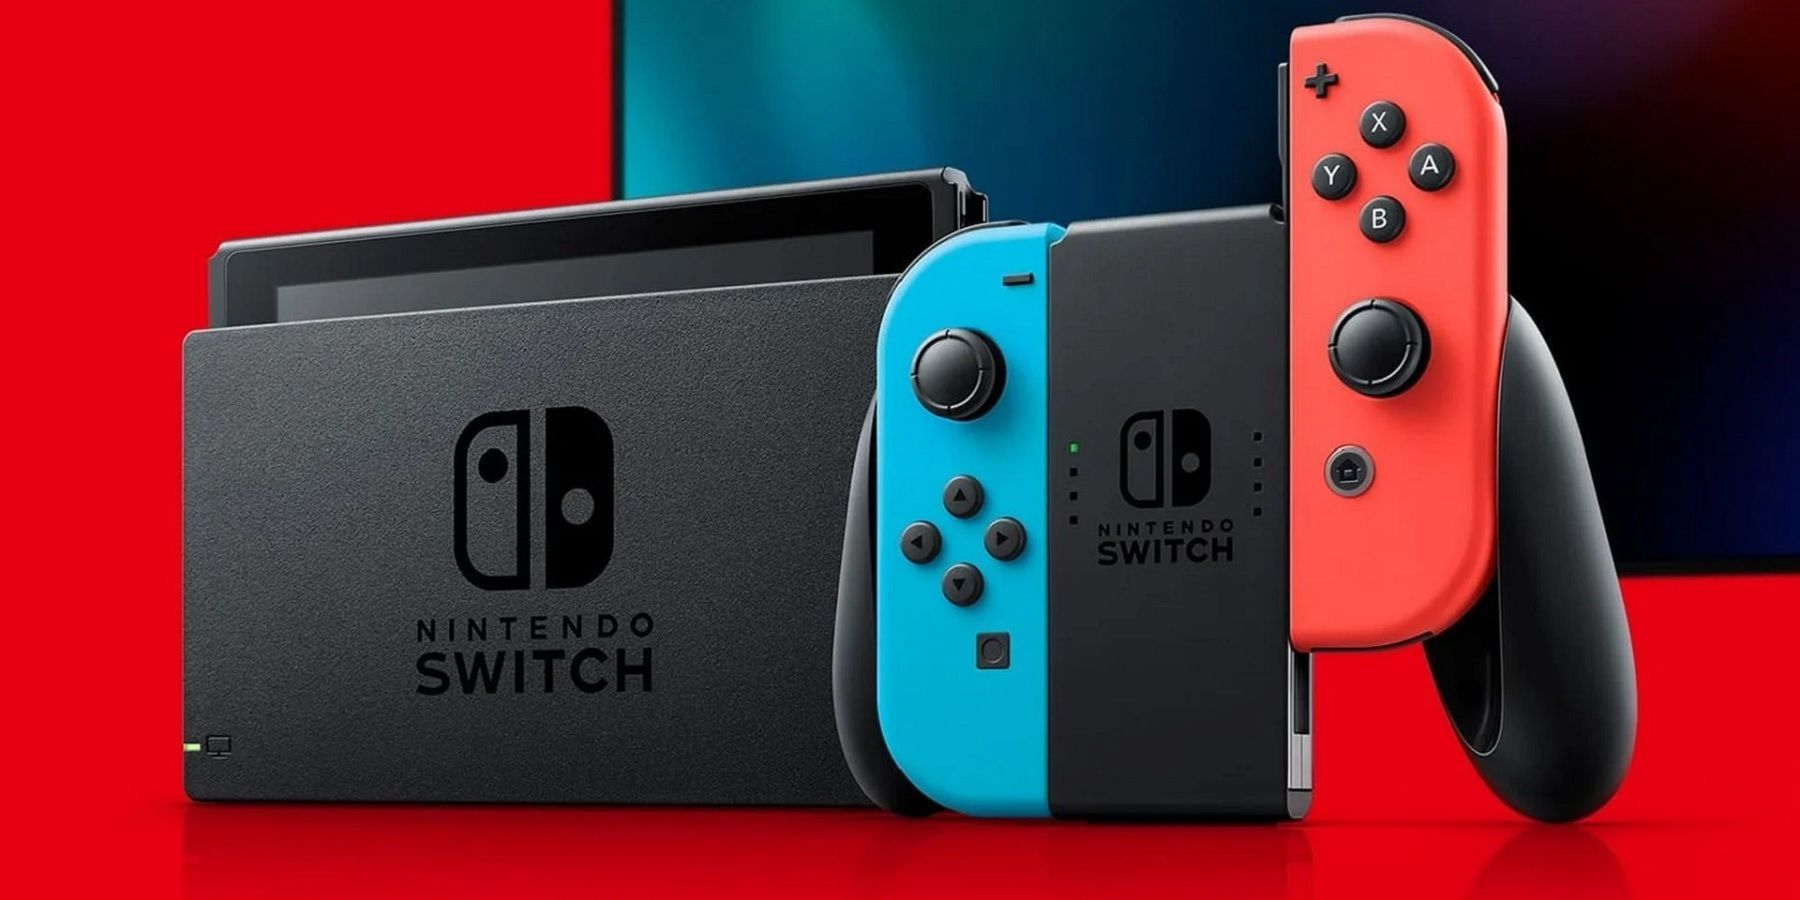 Nintendo Confirms 7 Major Switch Exclusives in the Works, Including One